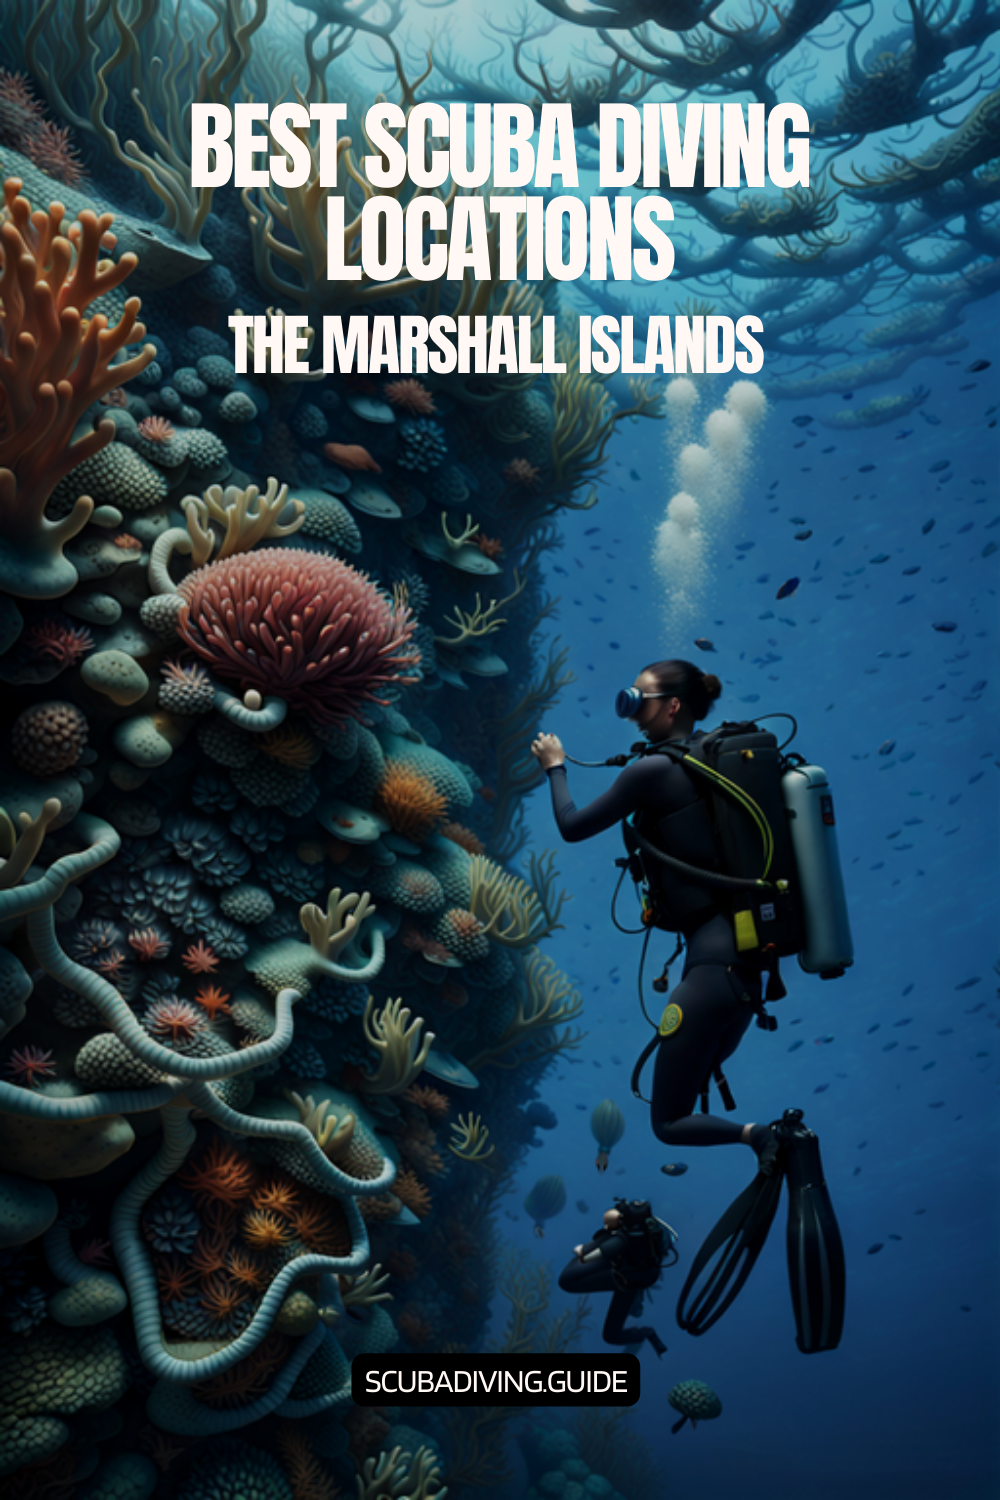 Scuba Diving Locations in The Marshall Islands